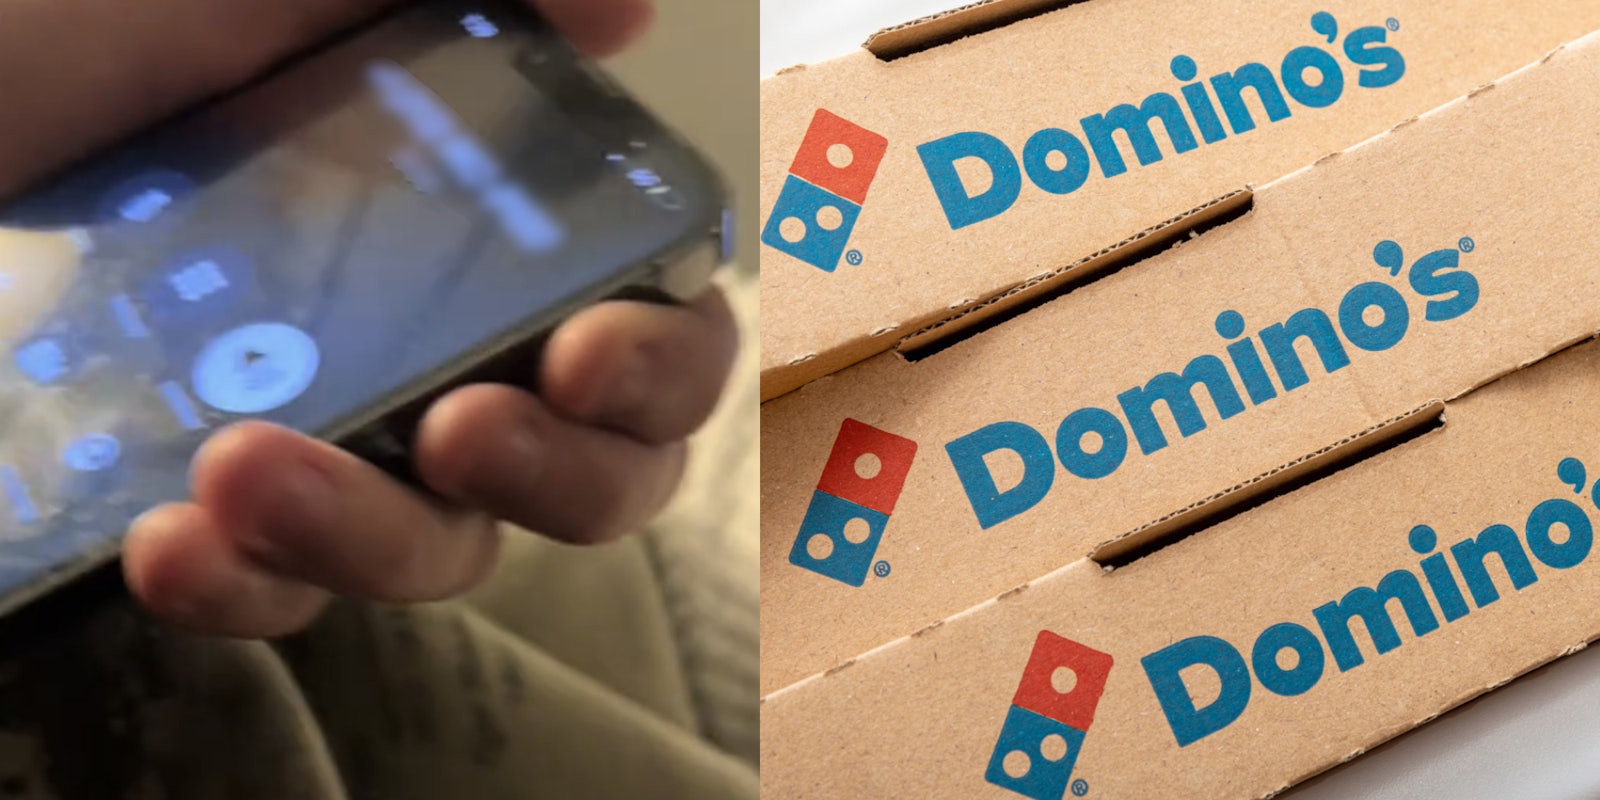 (l) Hand holding phone (r) Domino's boxes